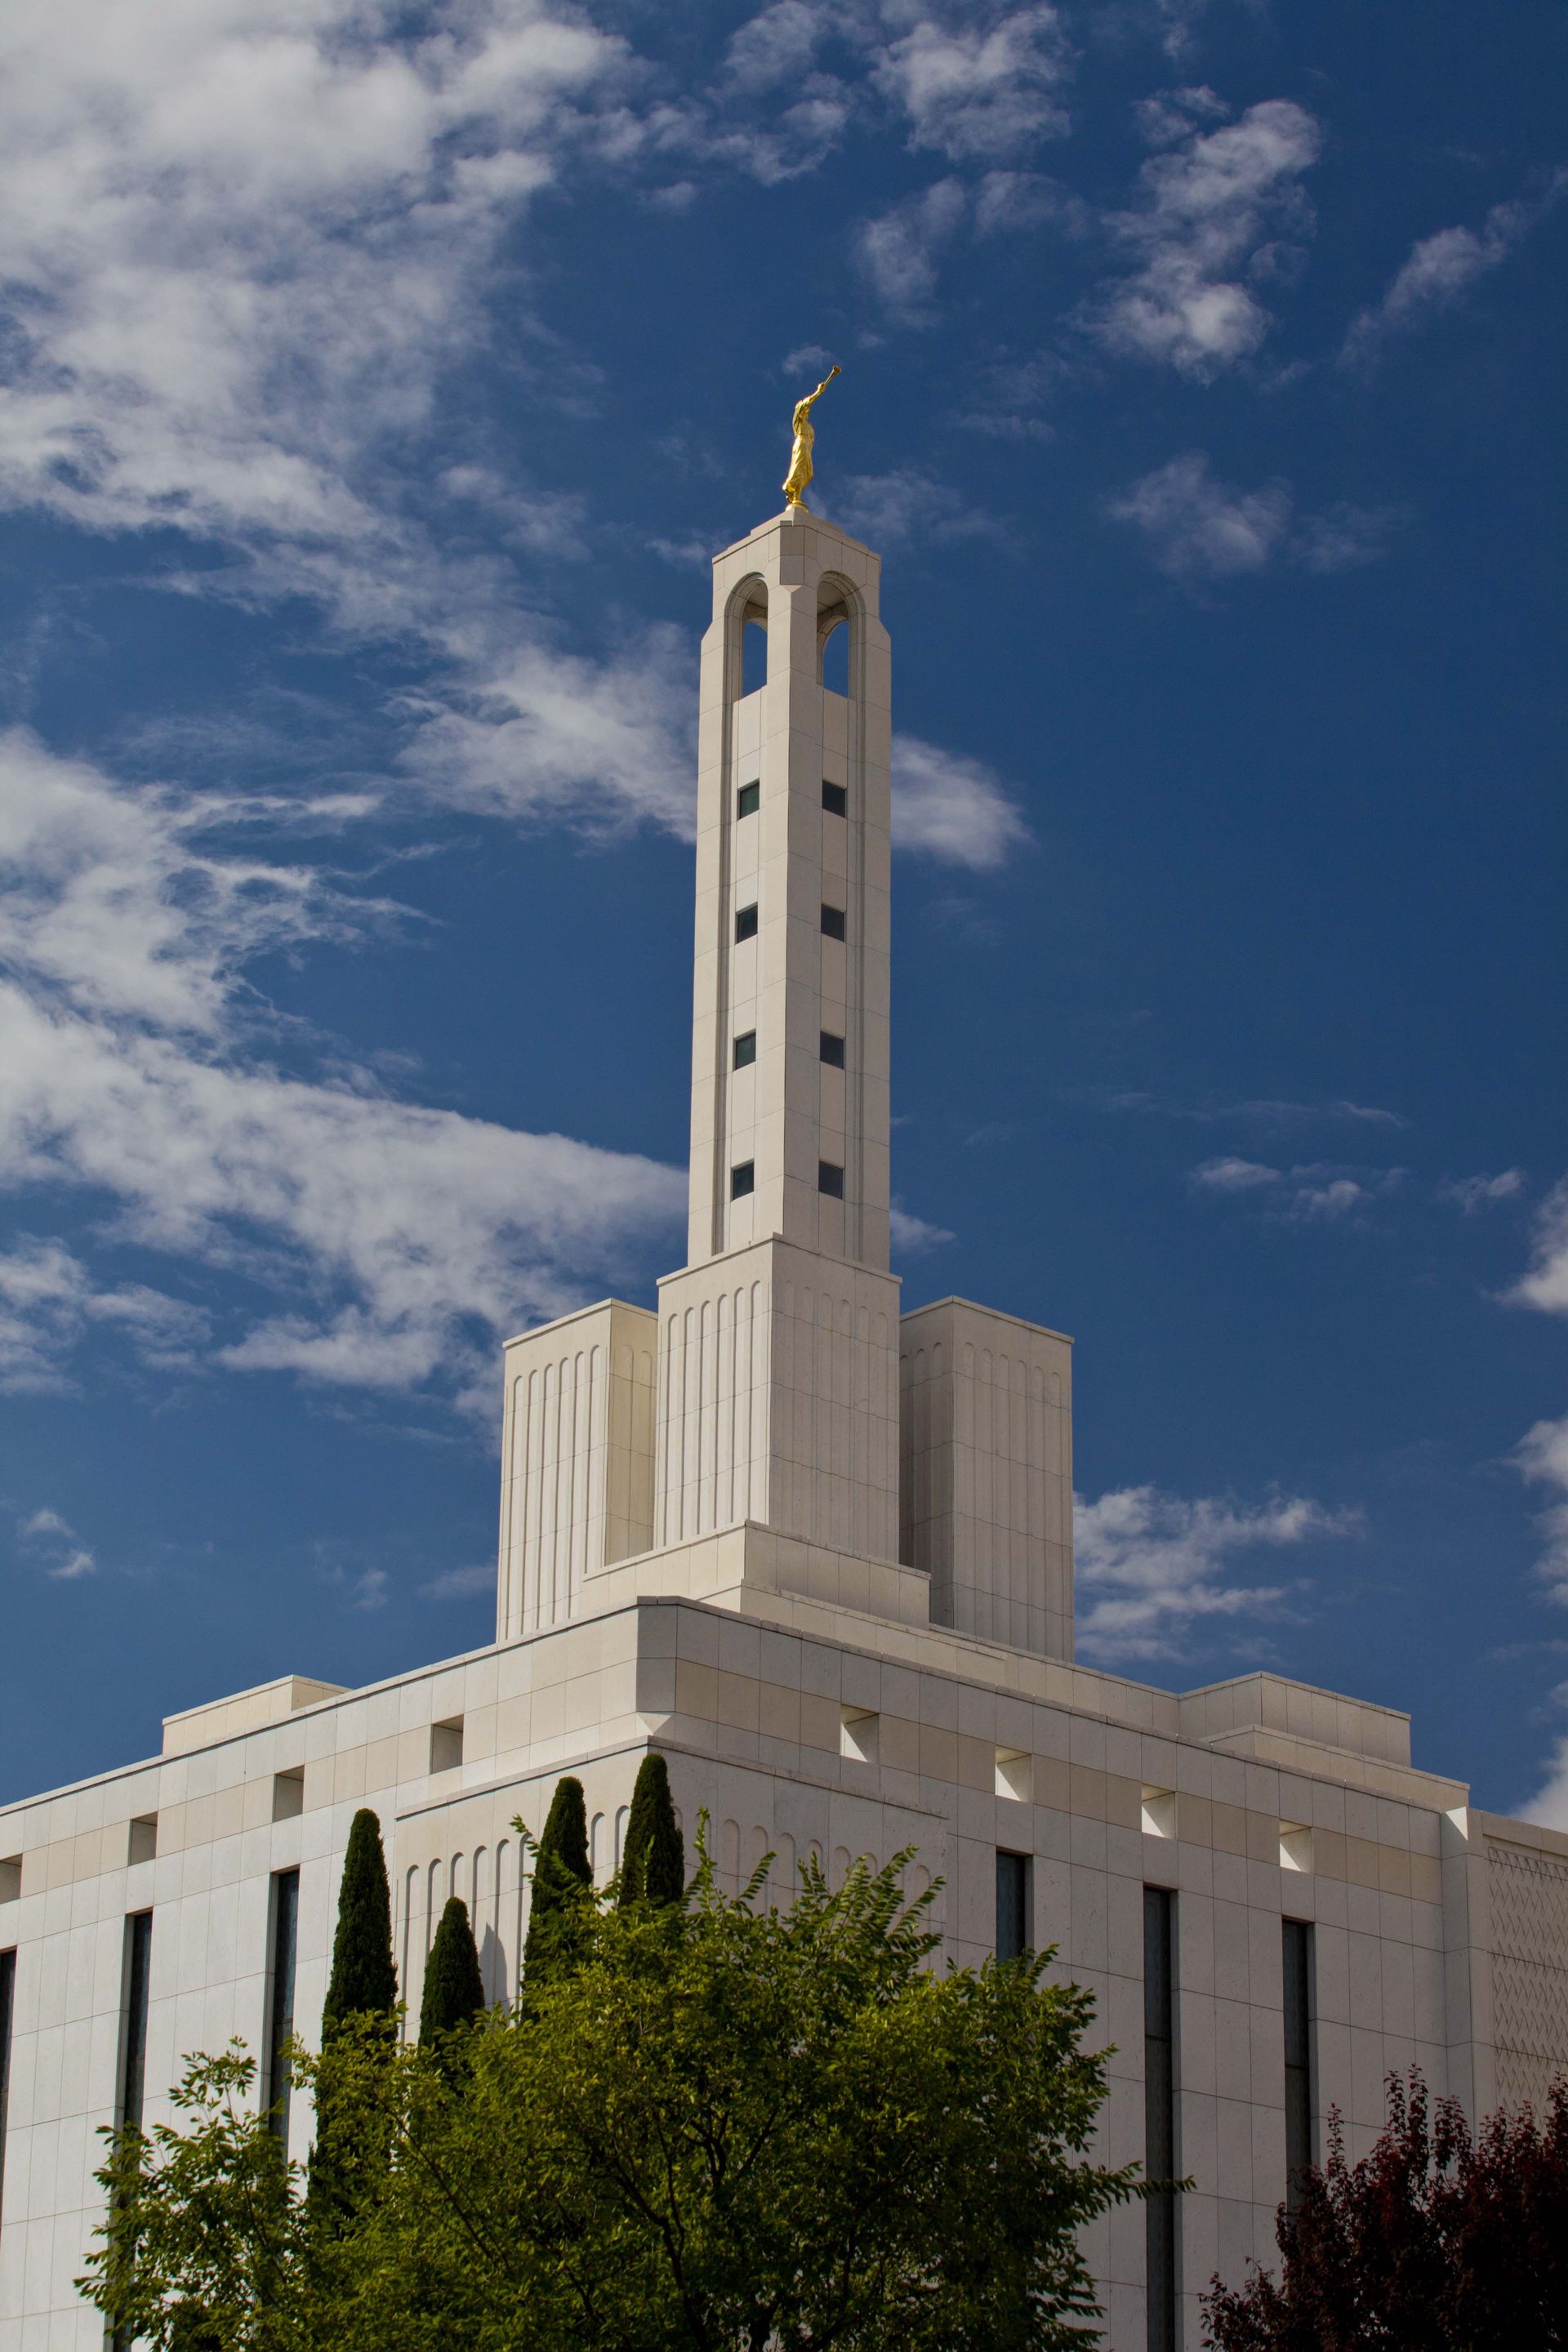 The Madrid Spain Temple spire, including the exterior of the temple.